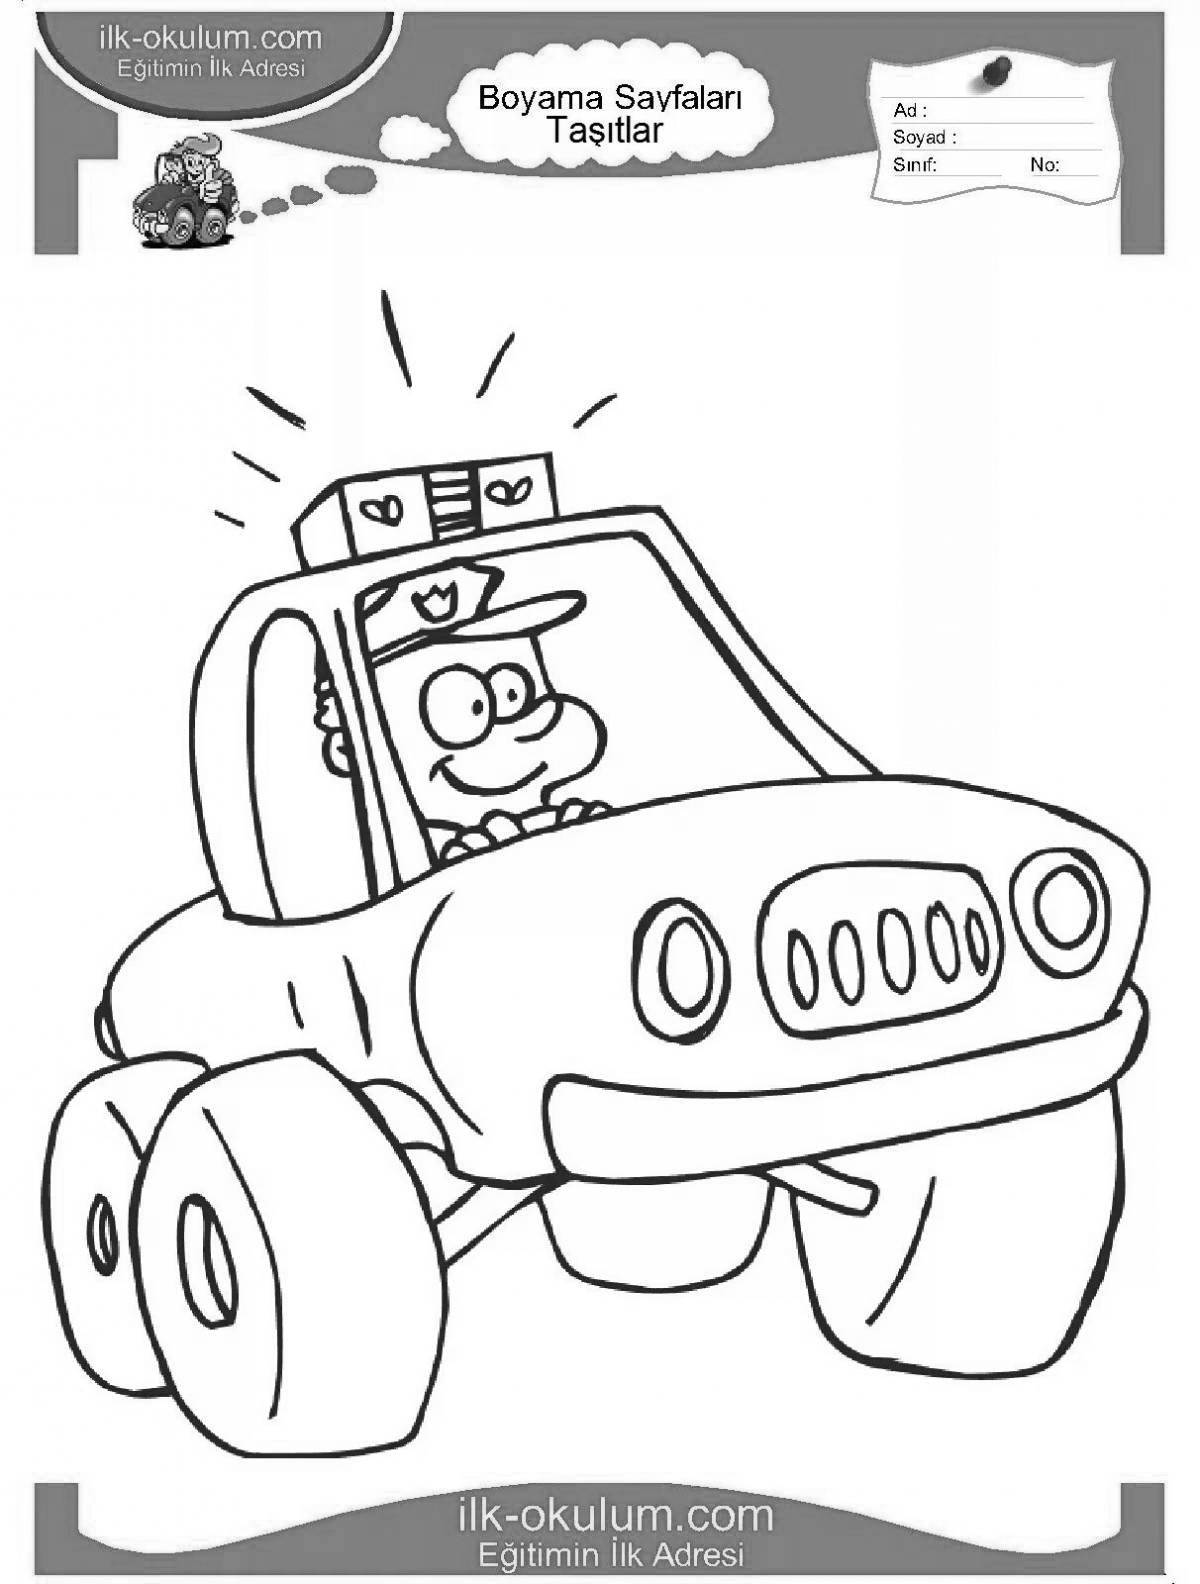 Coloring page cute taxi car